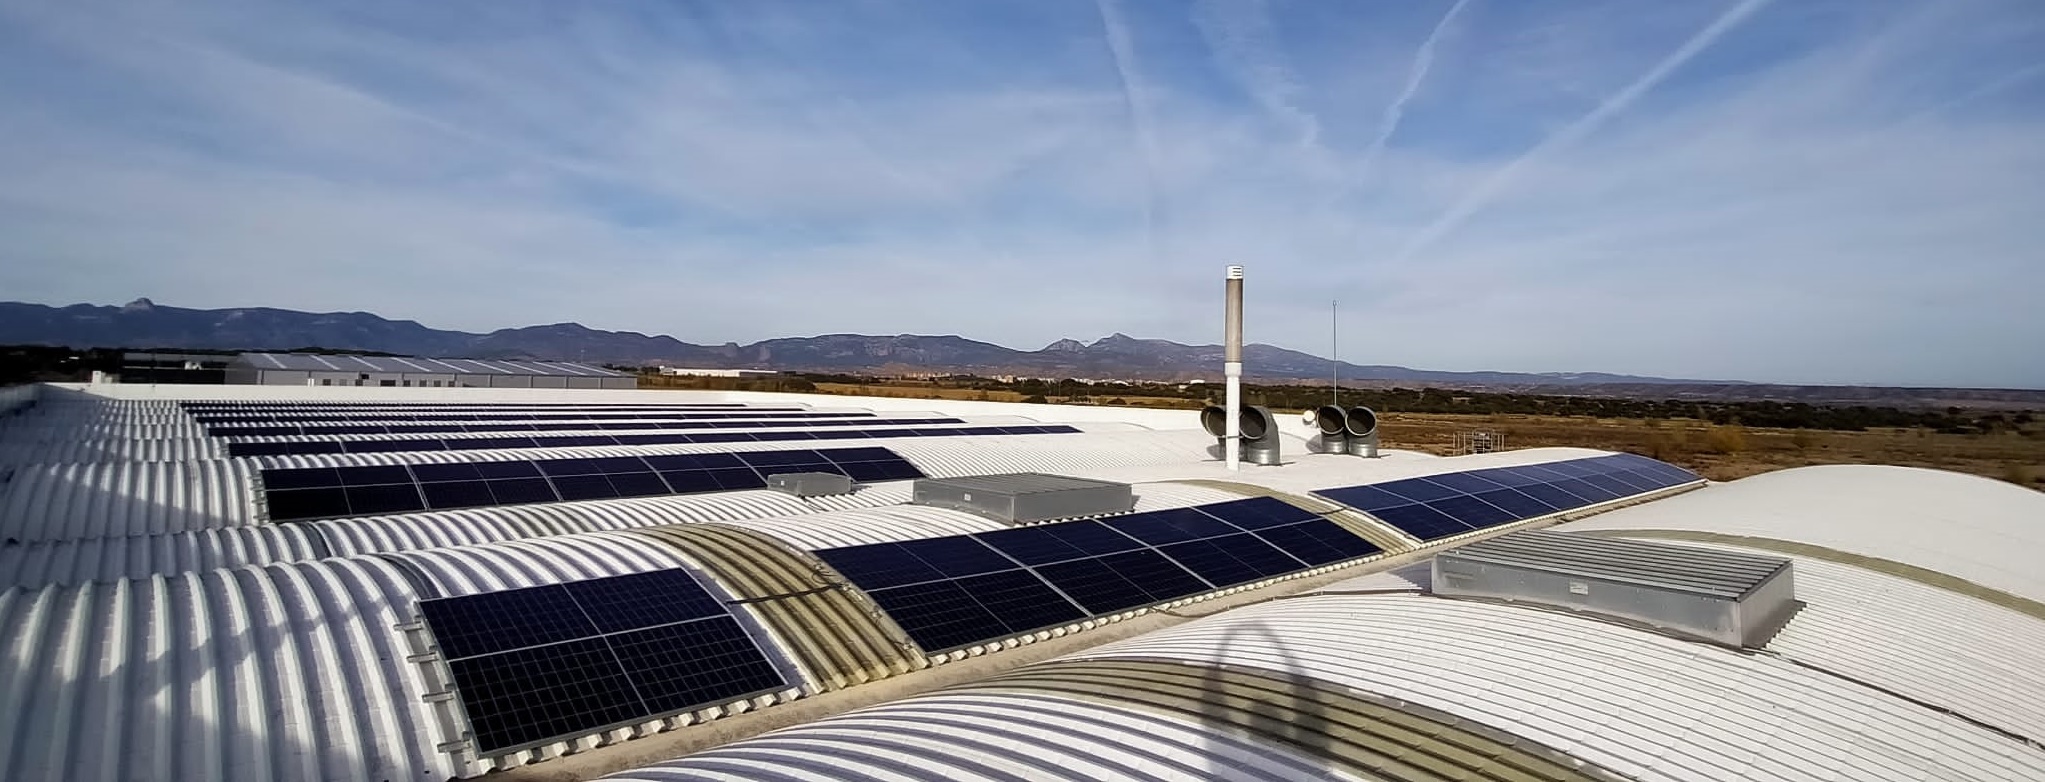 100kW photovoltaic system at BigMat Huesca image 1